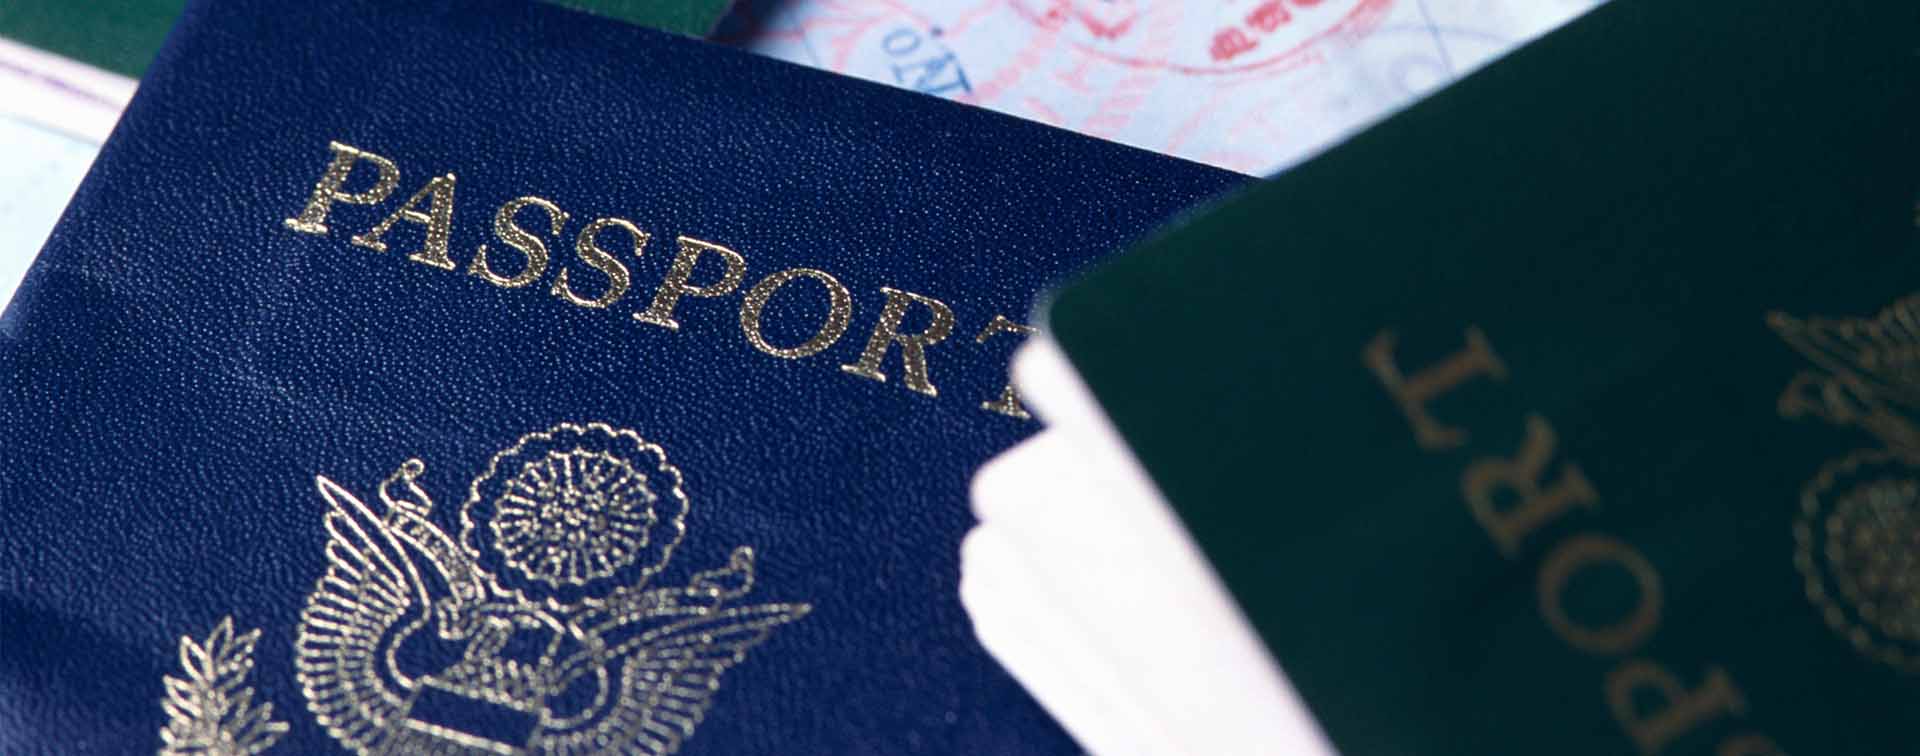 American passports, green, blue, black on open page with visa stamps